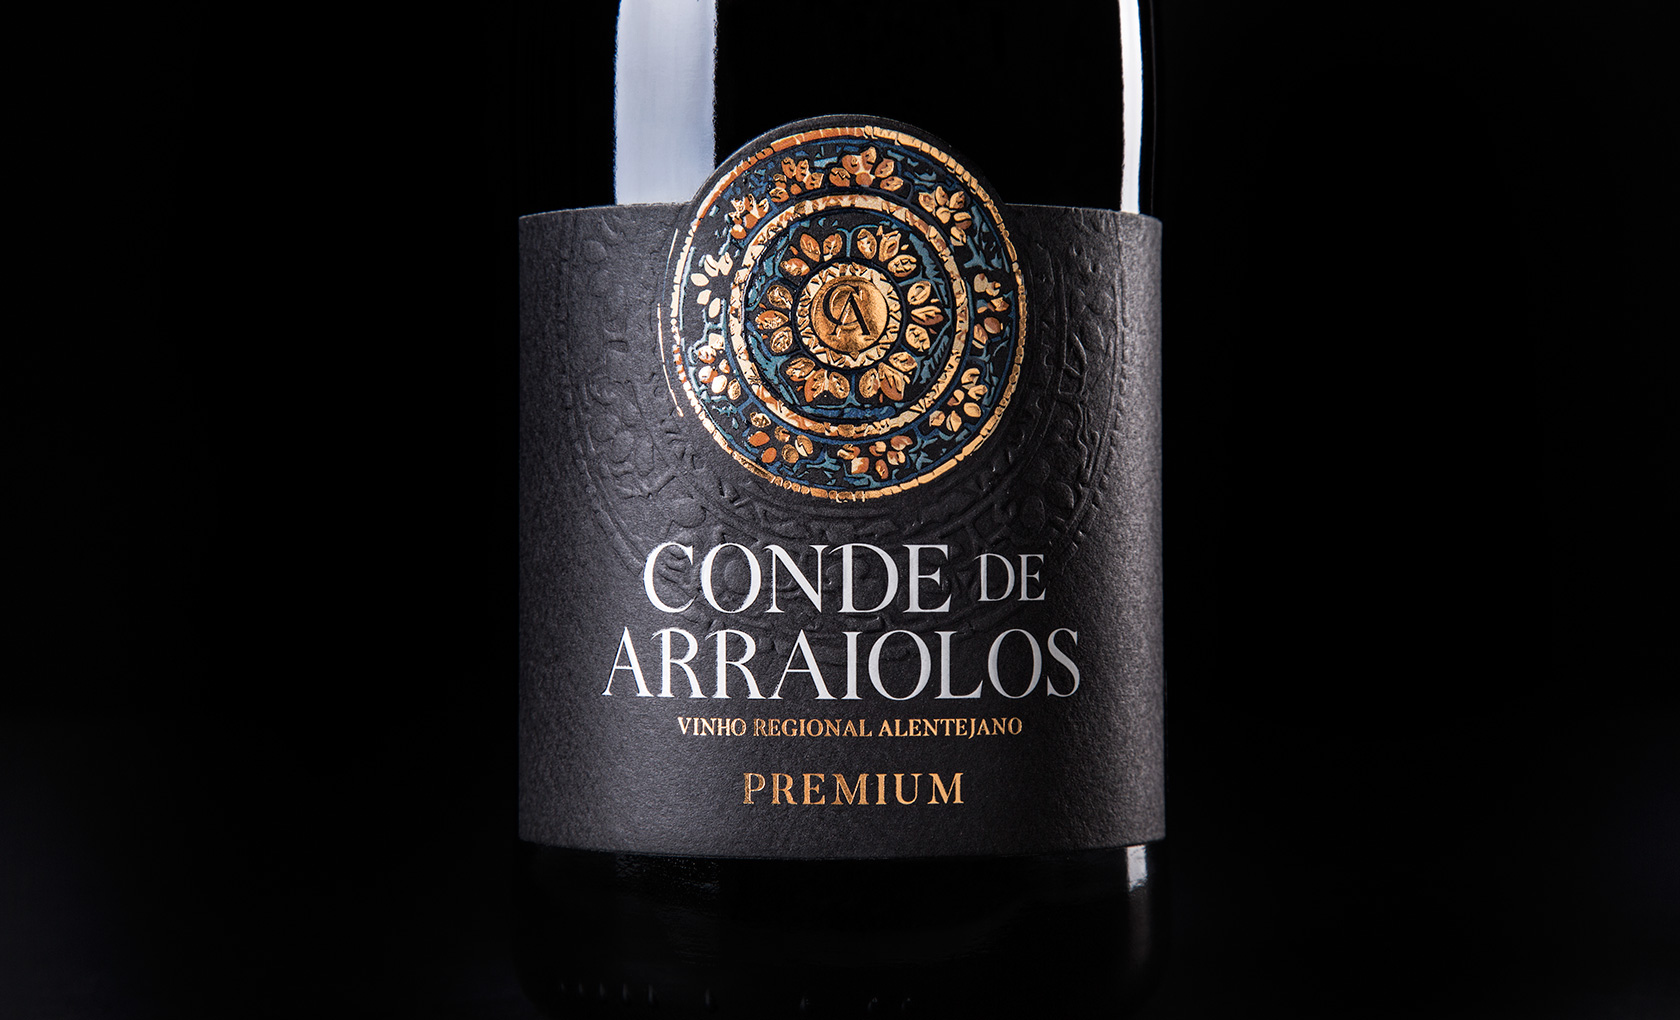 Wines with New Image Inspired by the Traditional Pottery from Alentejo